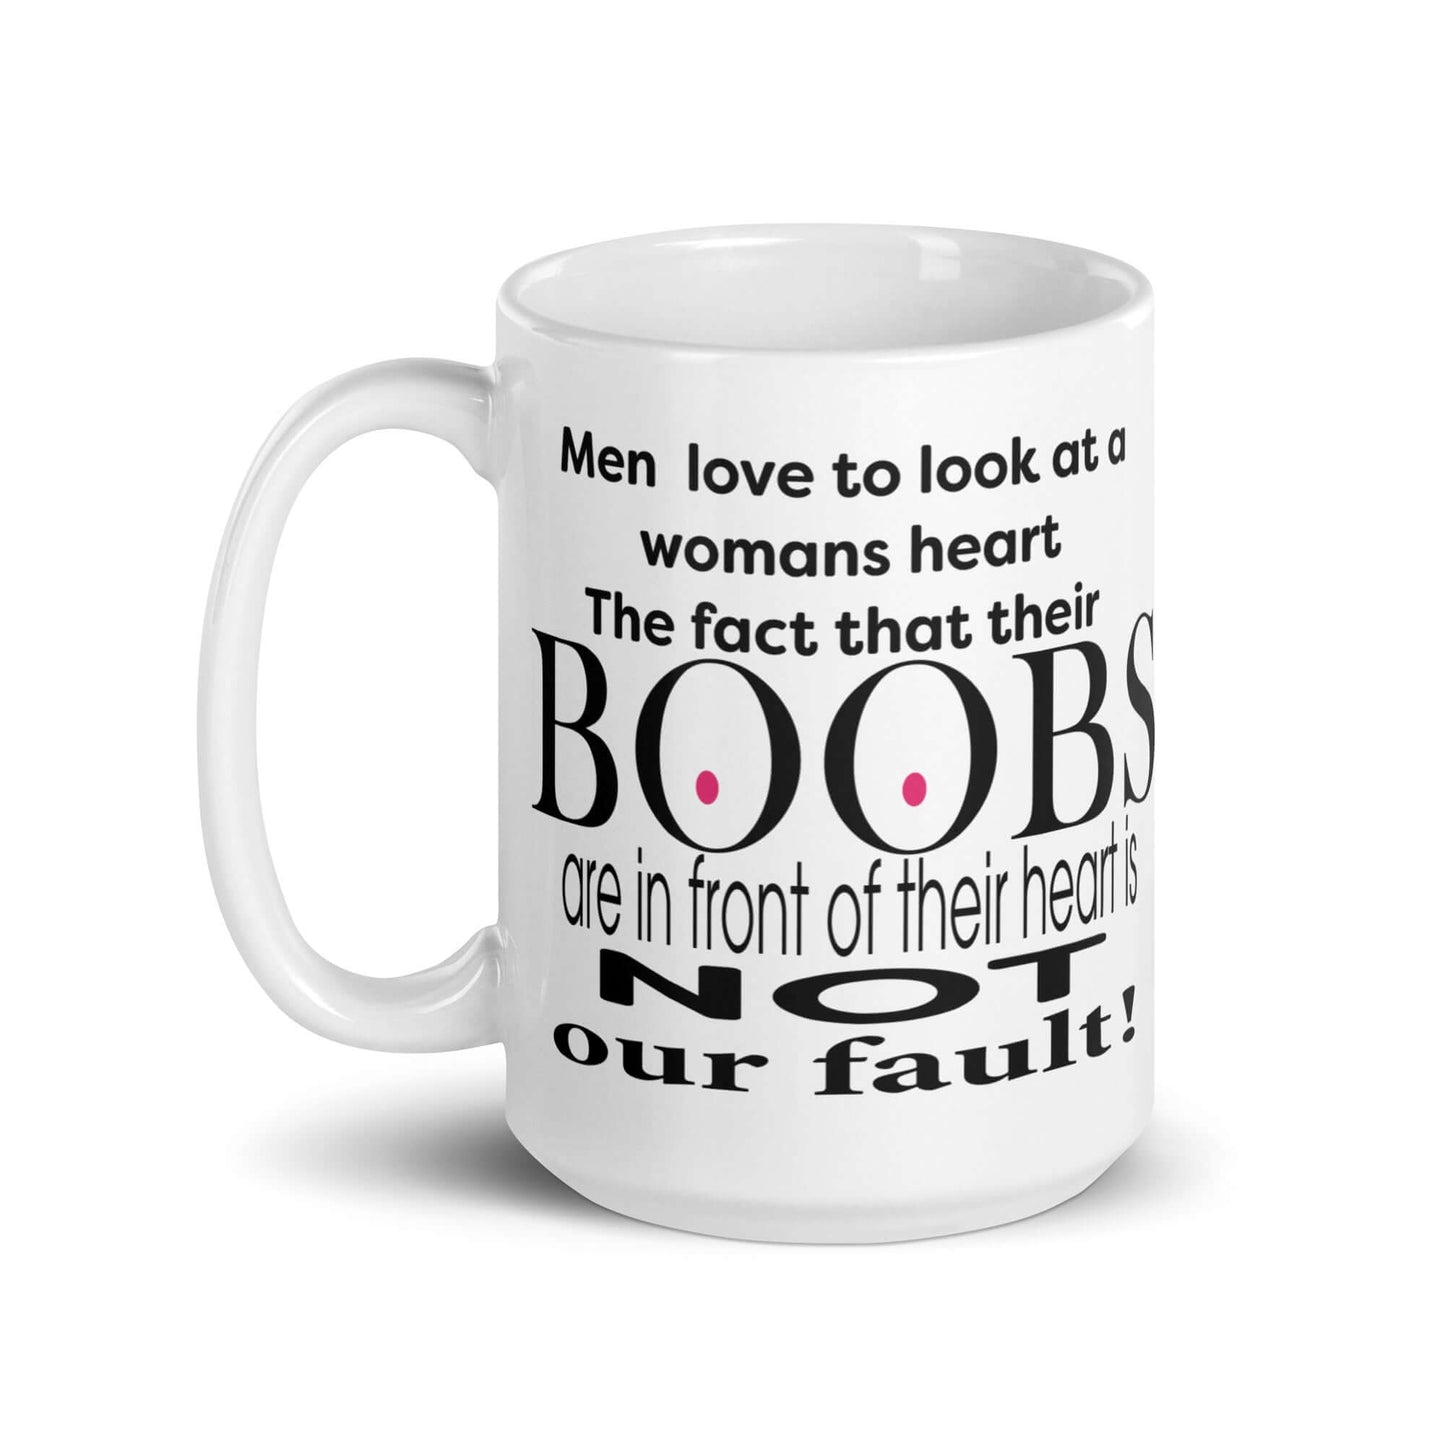 Men love to look at a womans heart. The fact that their BOOBS are in front of their heart is NOT our fault! - White glossy mug - Horrible Designs